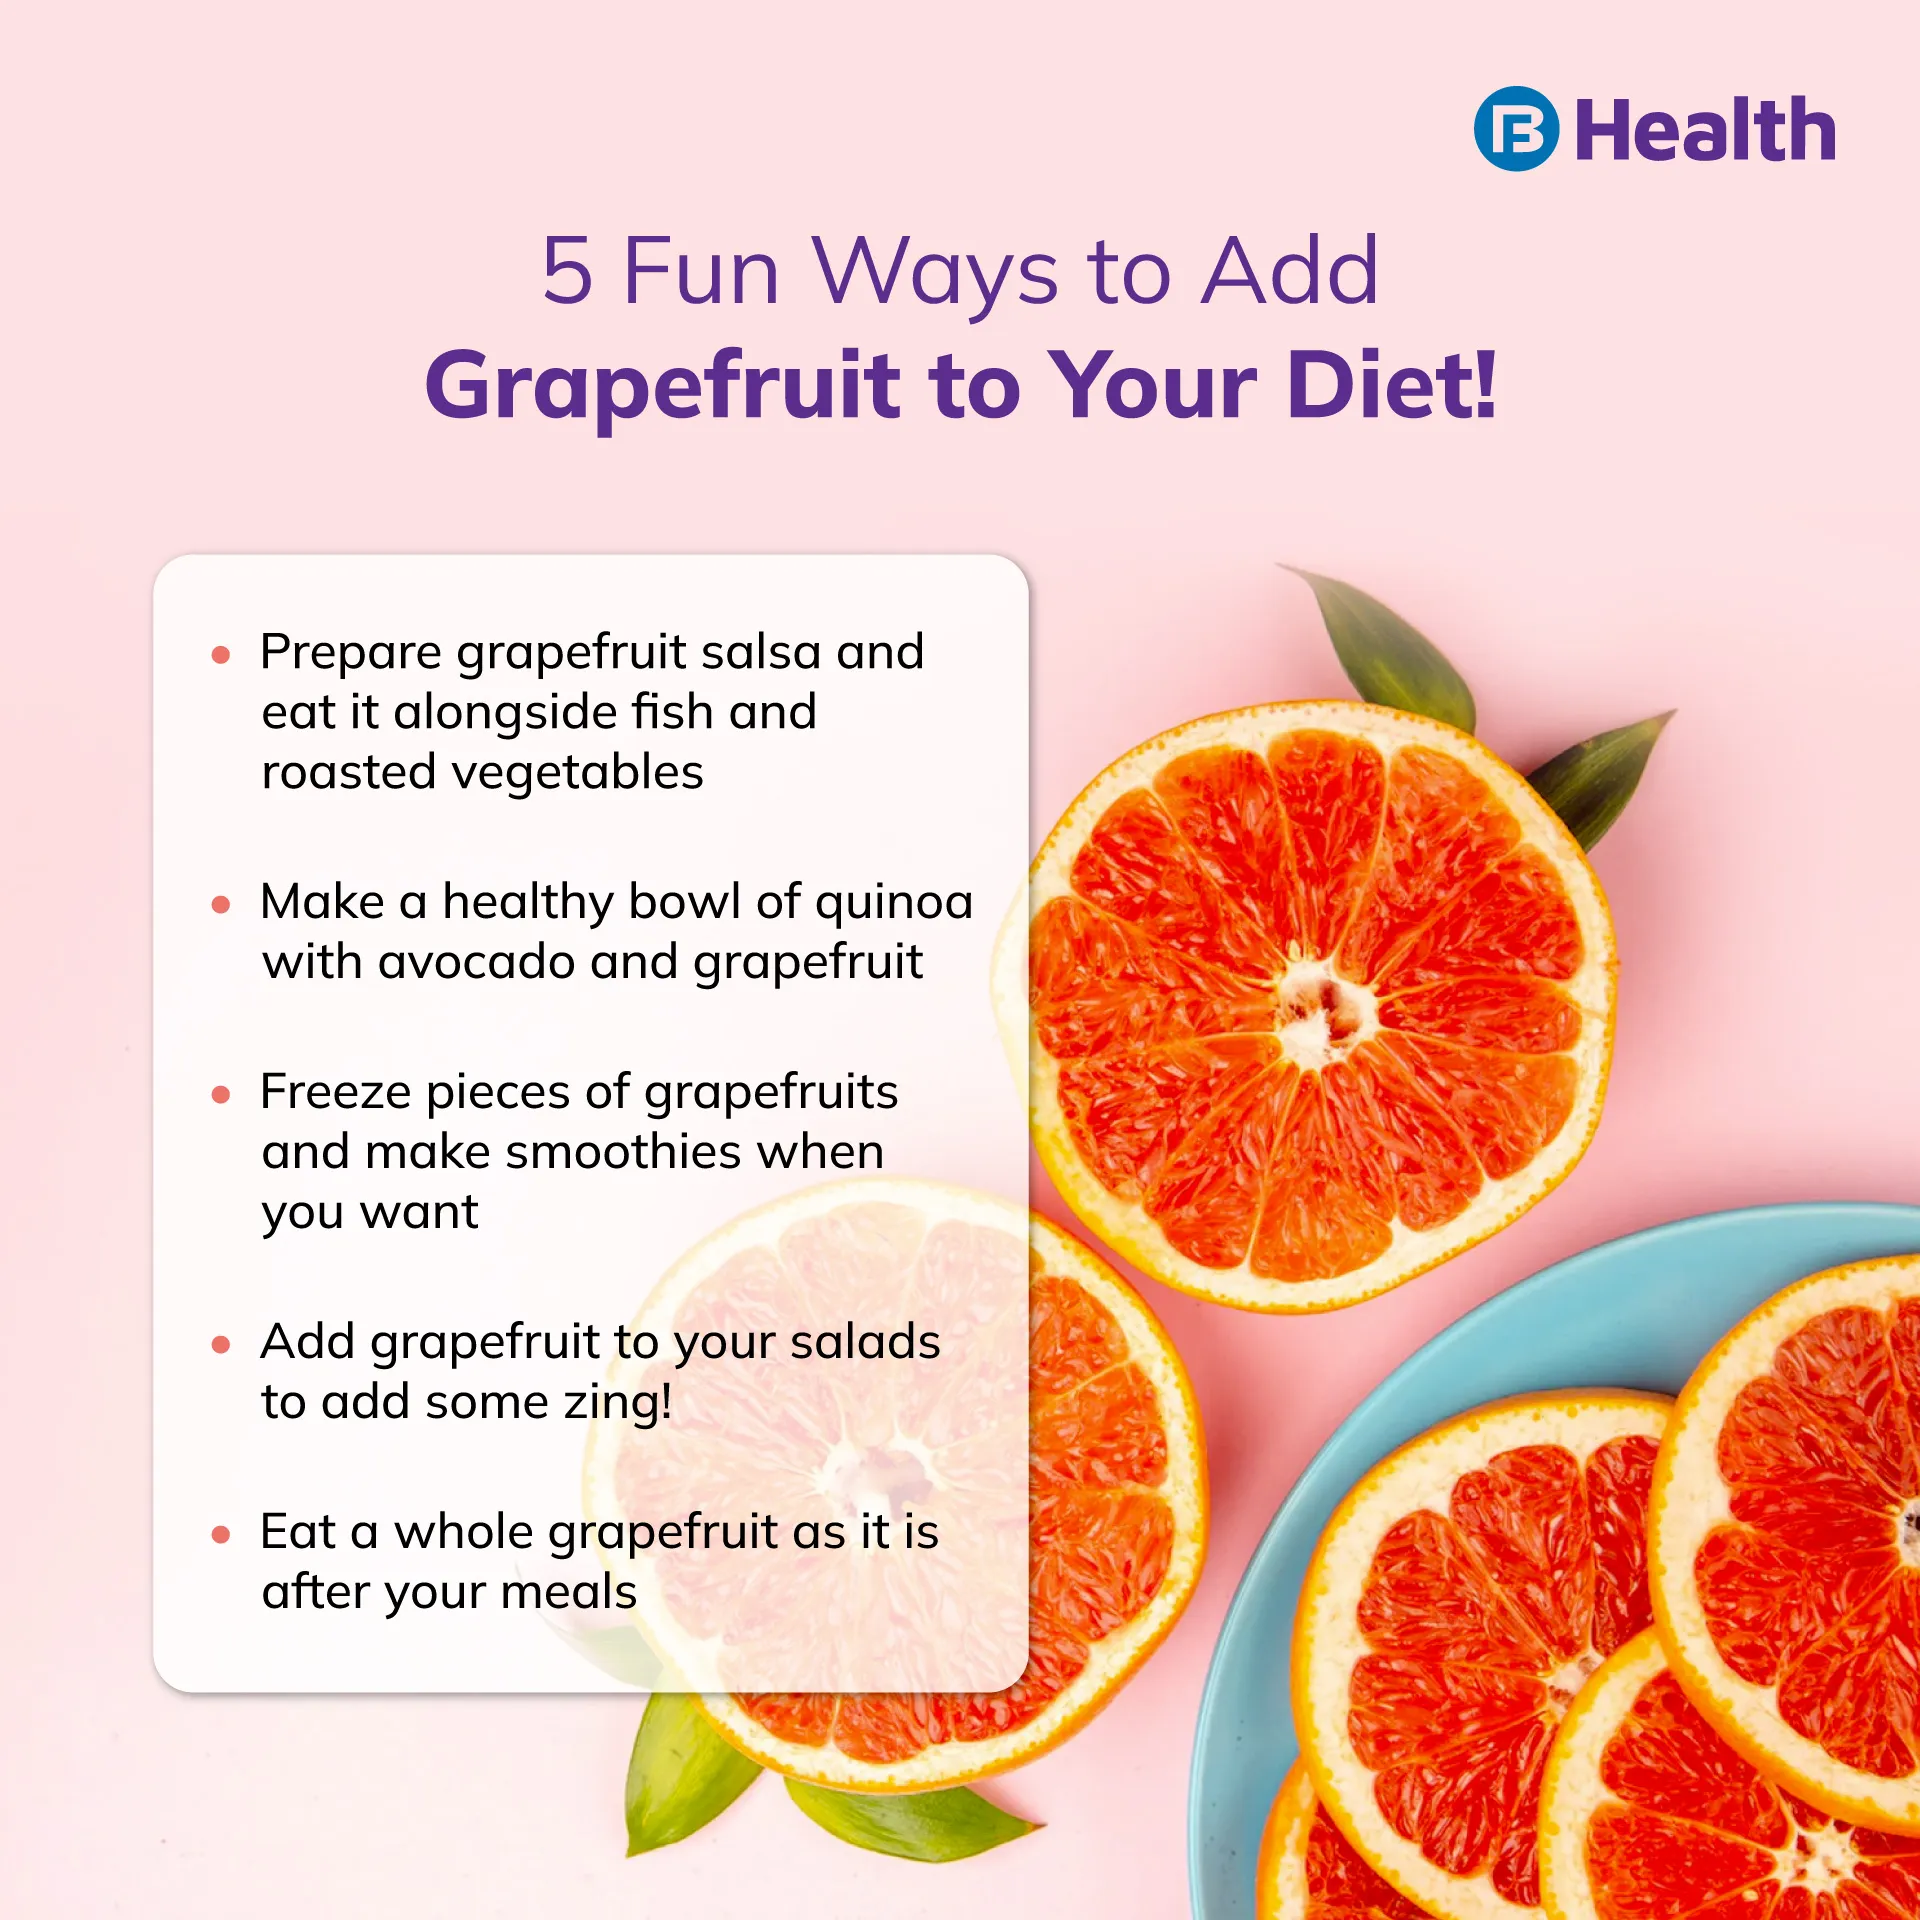 The Grapefruit Diet: Pros, Cons, and What You Can Eat